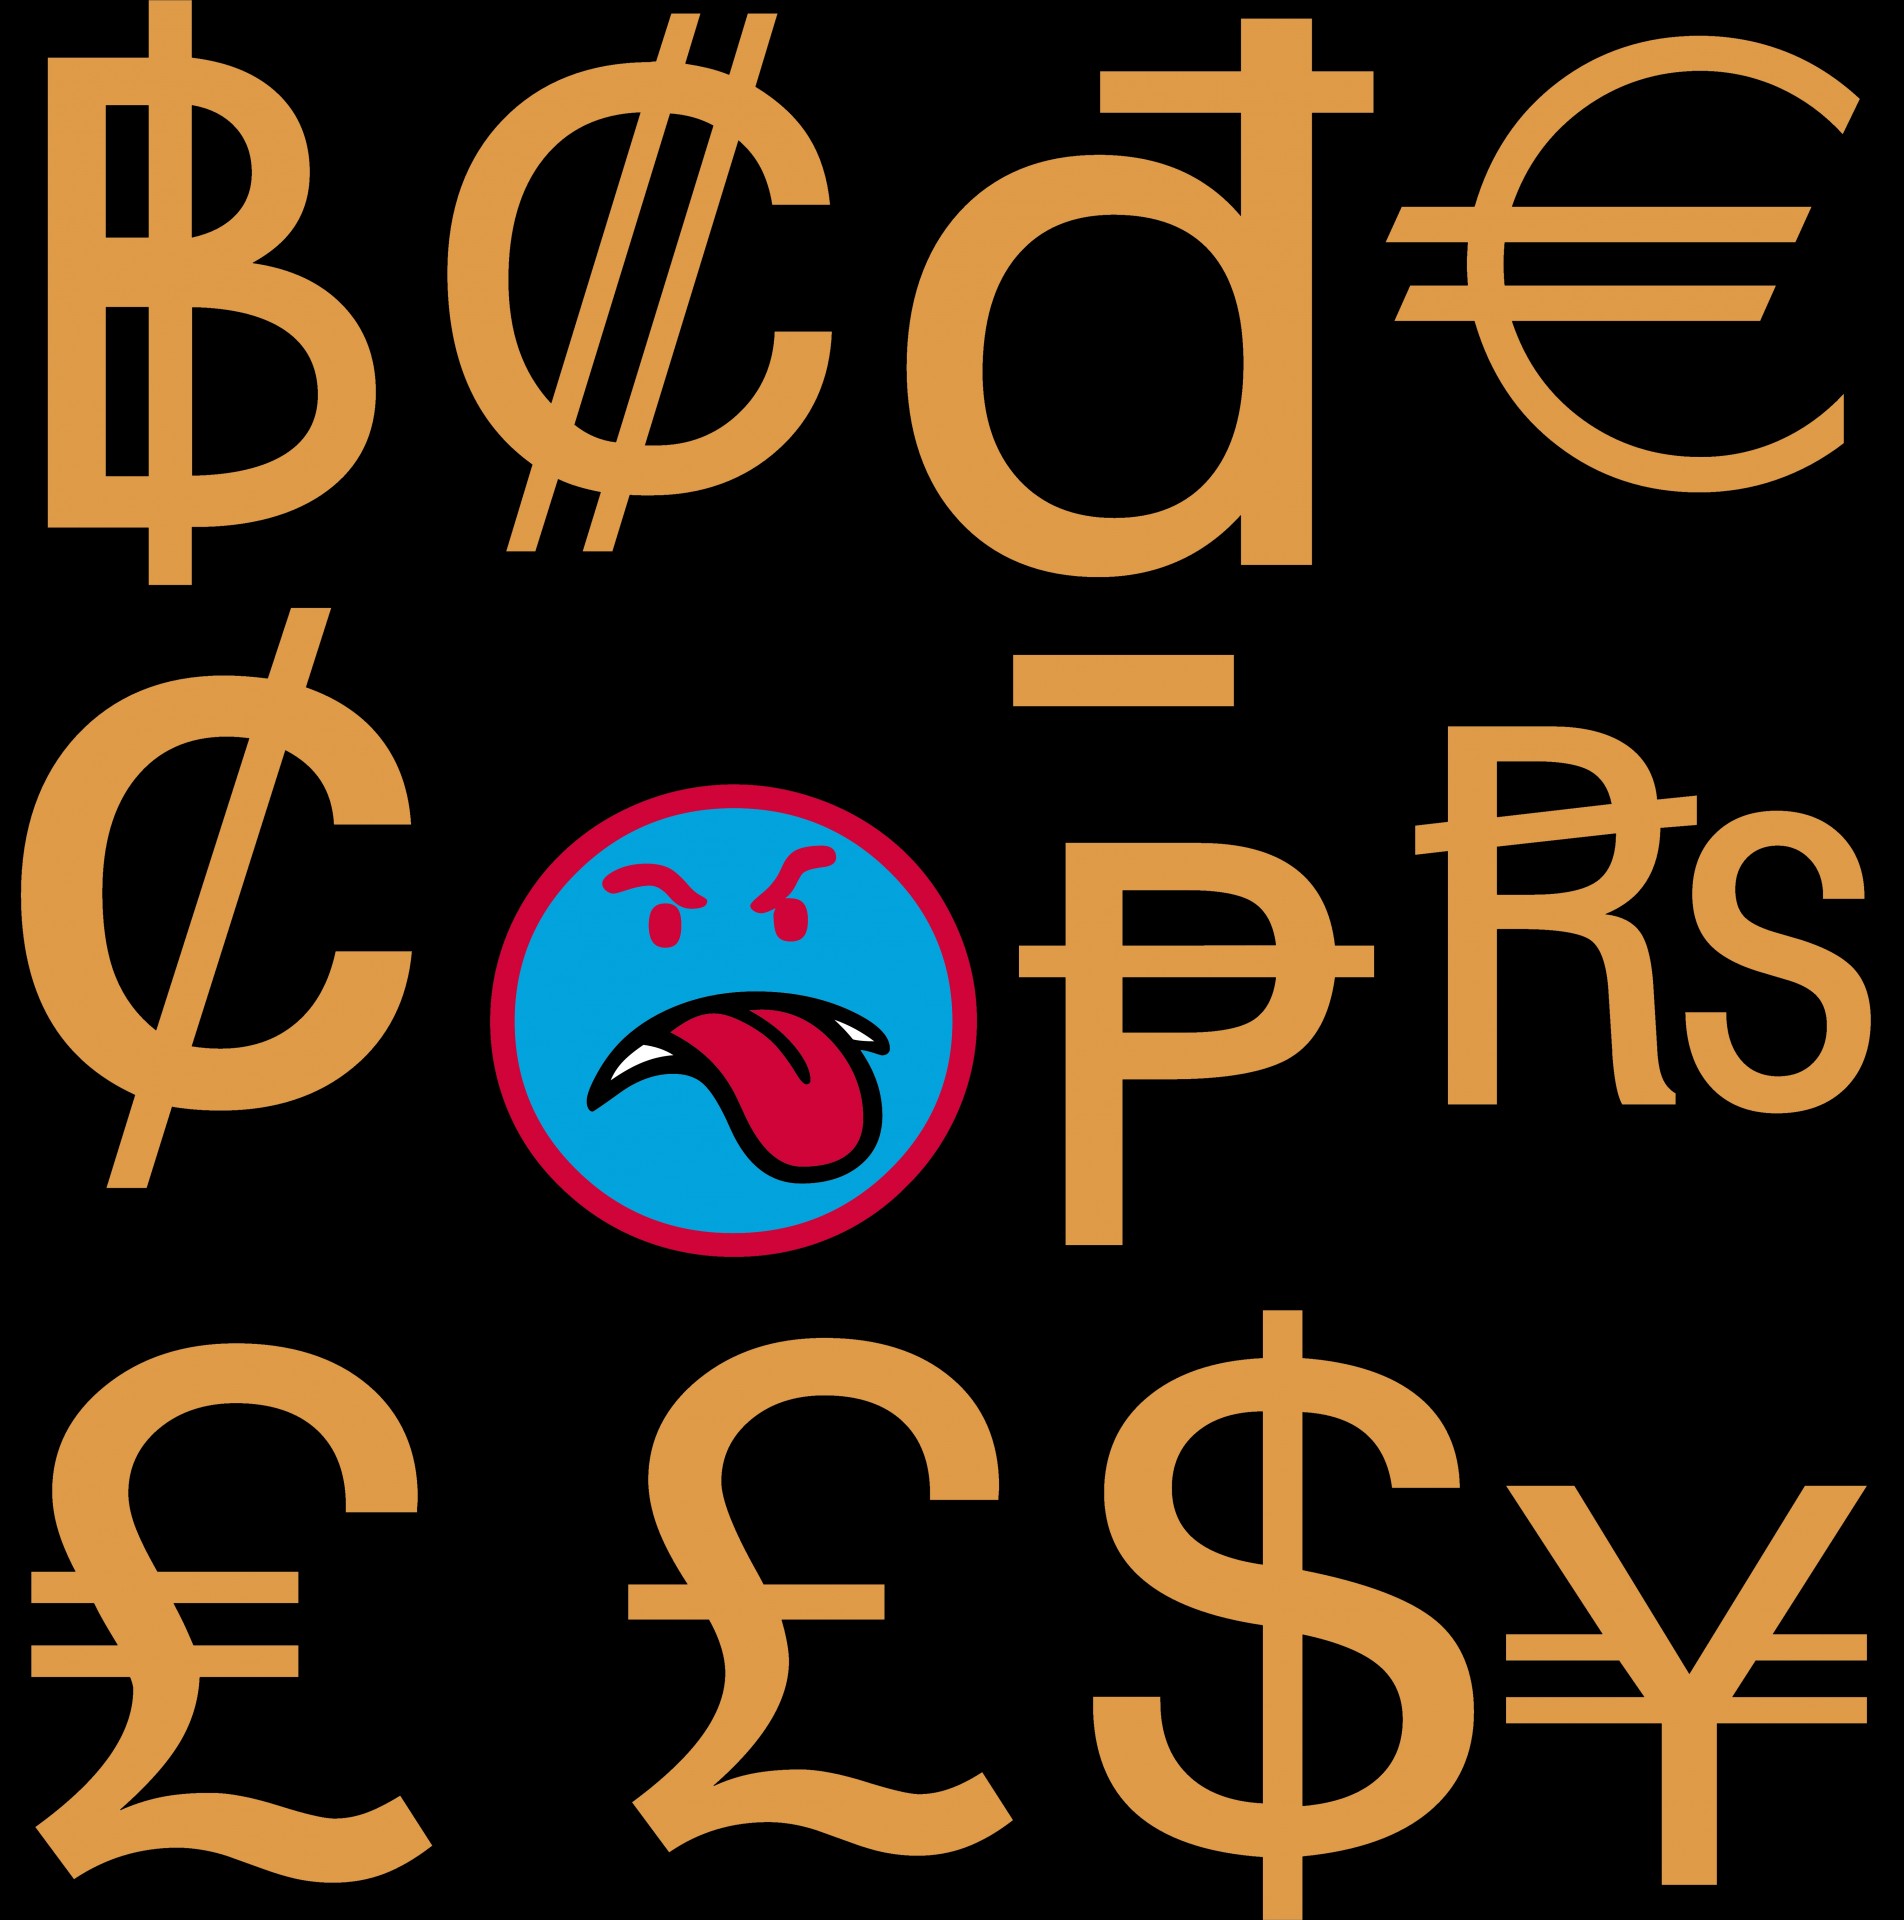 currency sign symbol free photo